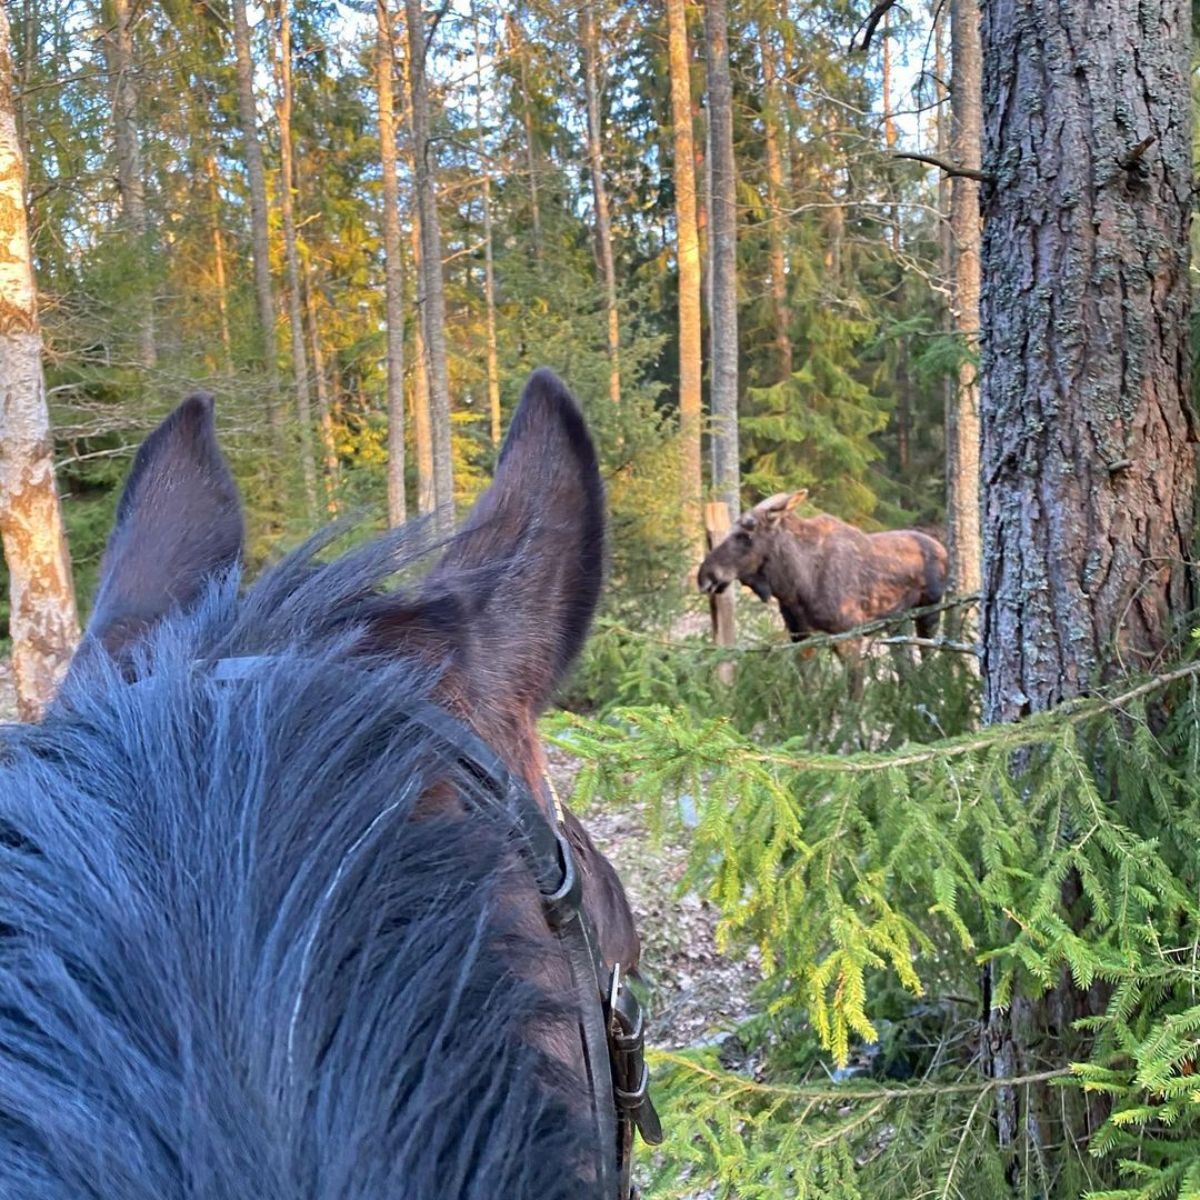 A horse watching a moose in the forest.